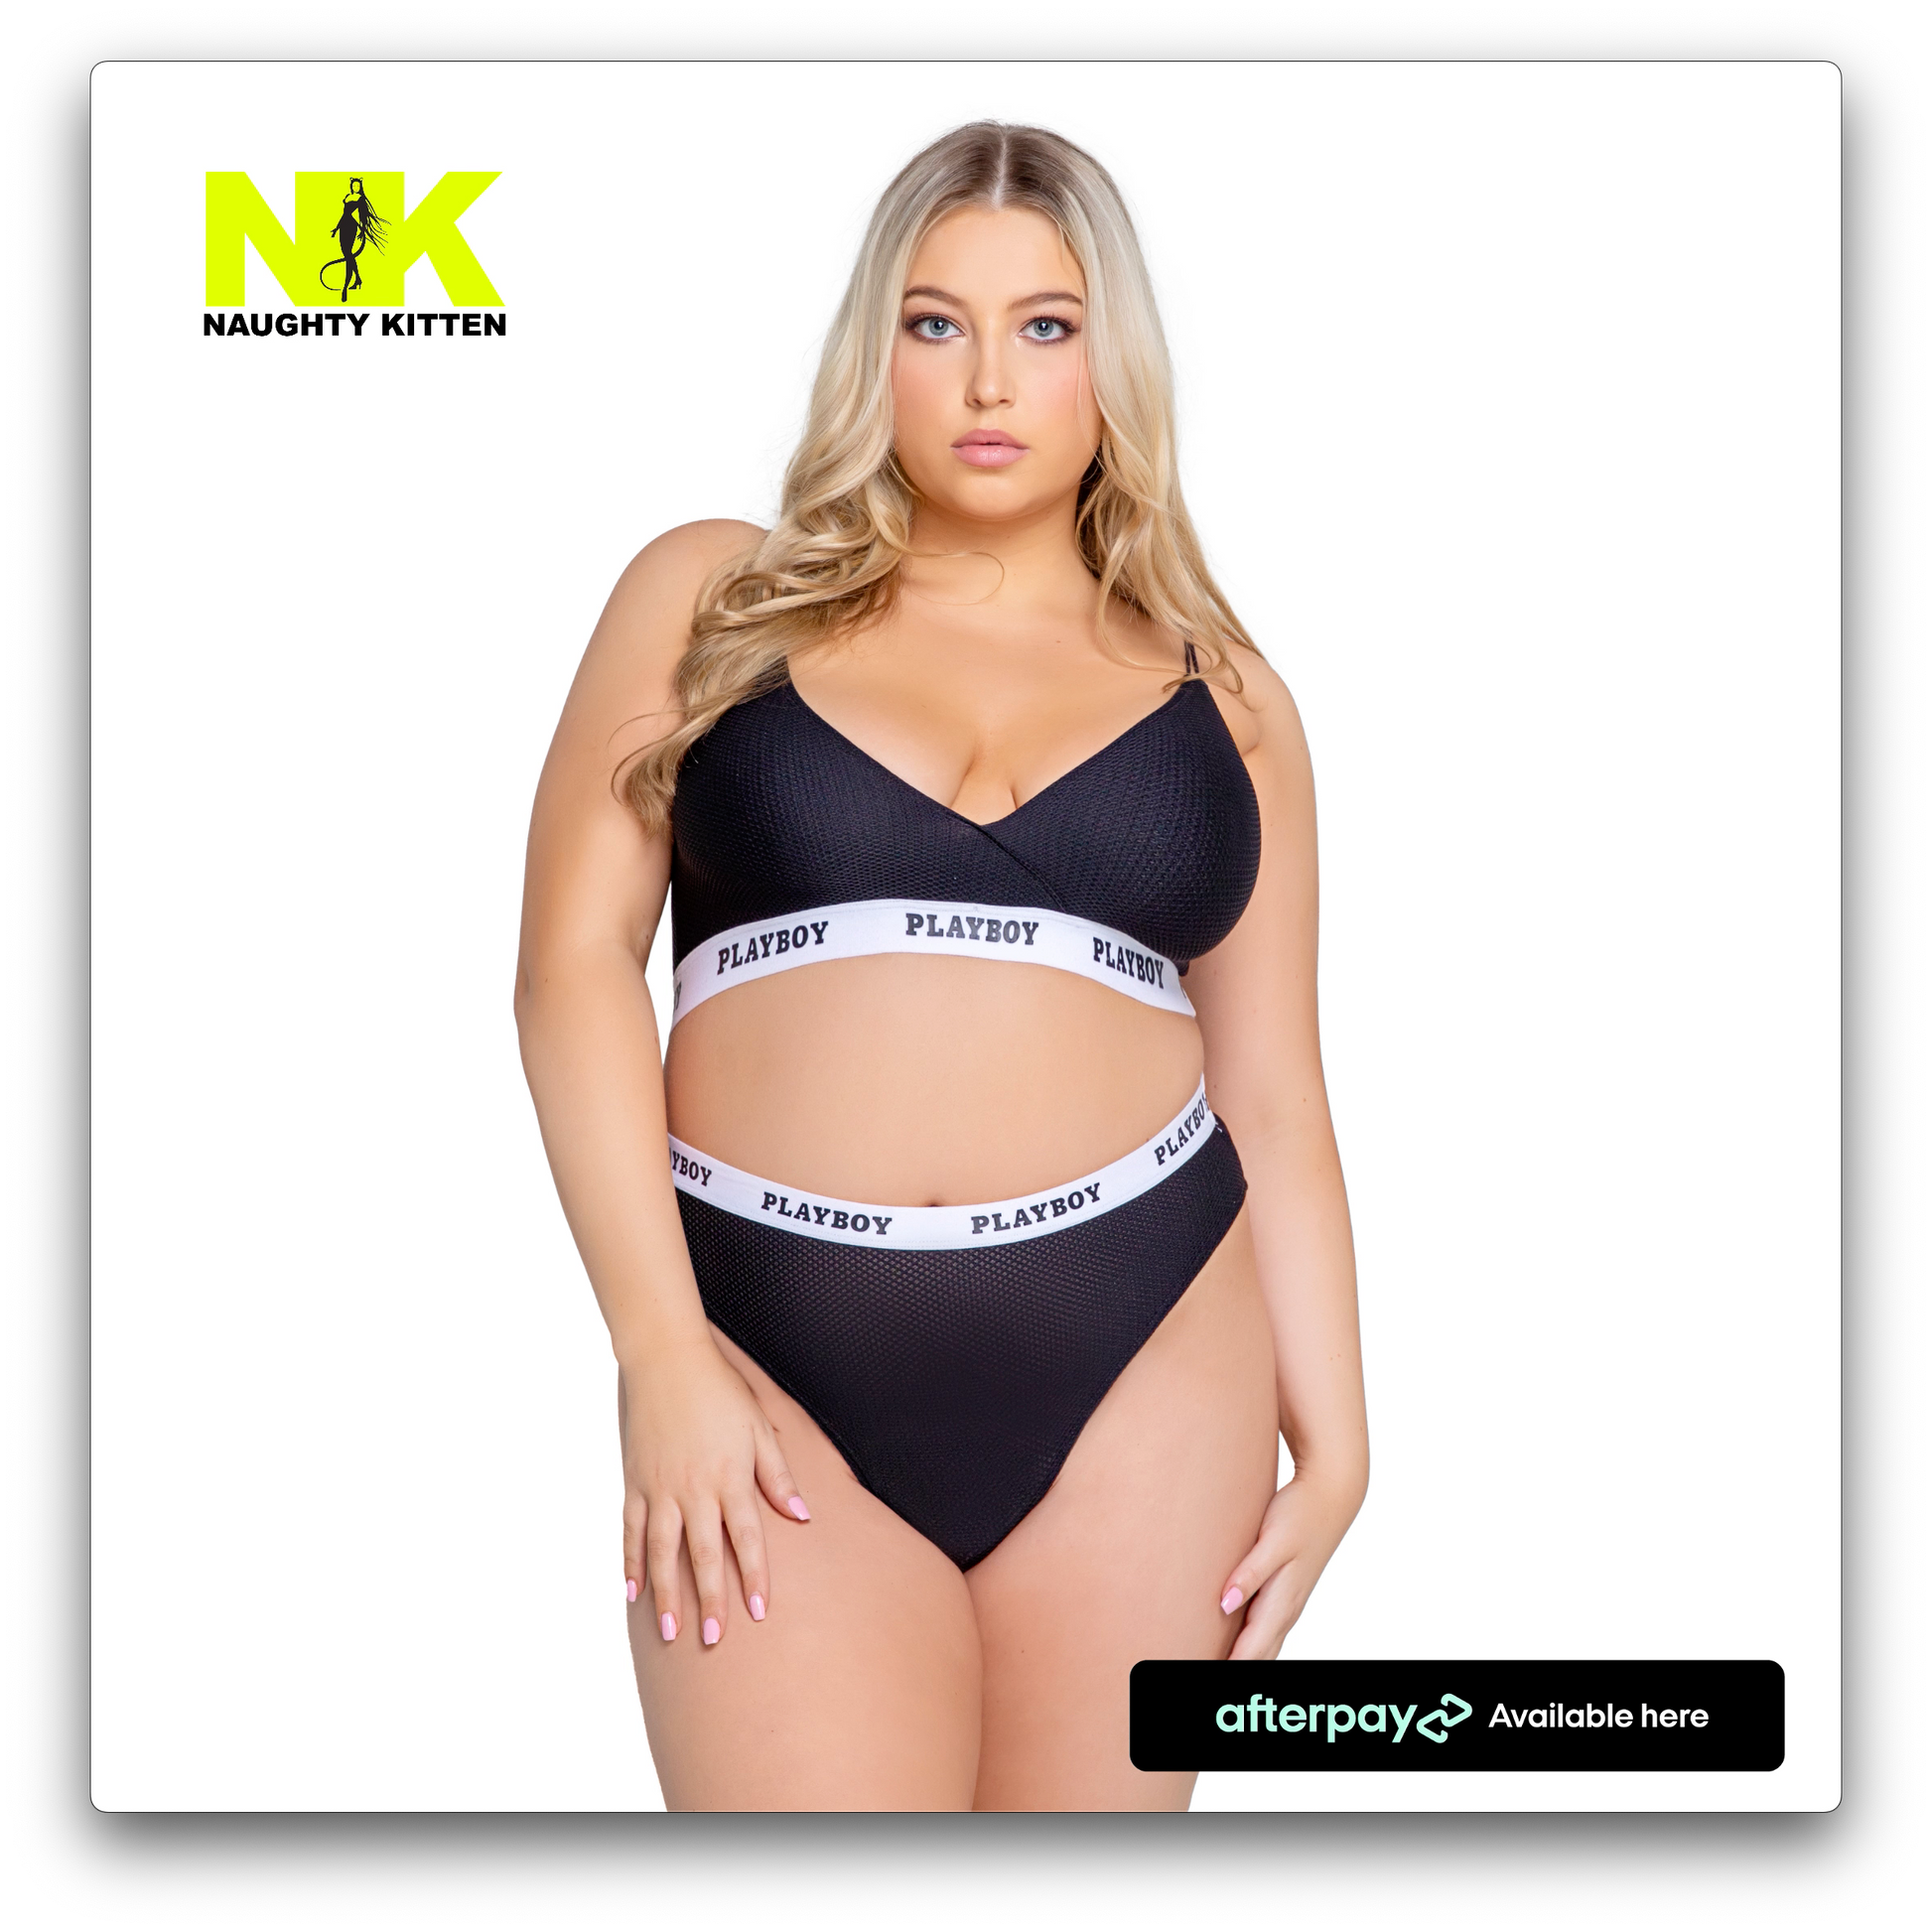 Naughty Kitten Clothing Playboy Lifestyle 2-Piece Set - Black Front View Playboy Plus Size Lingerie